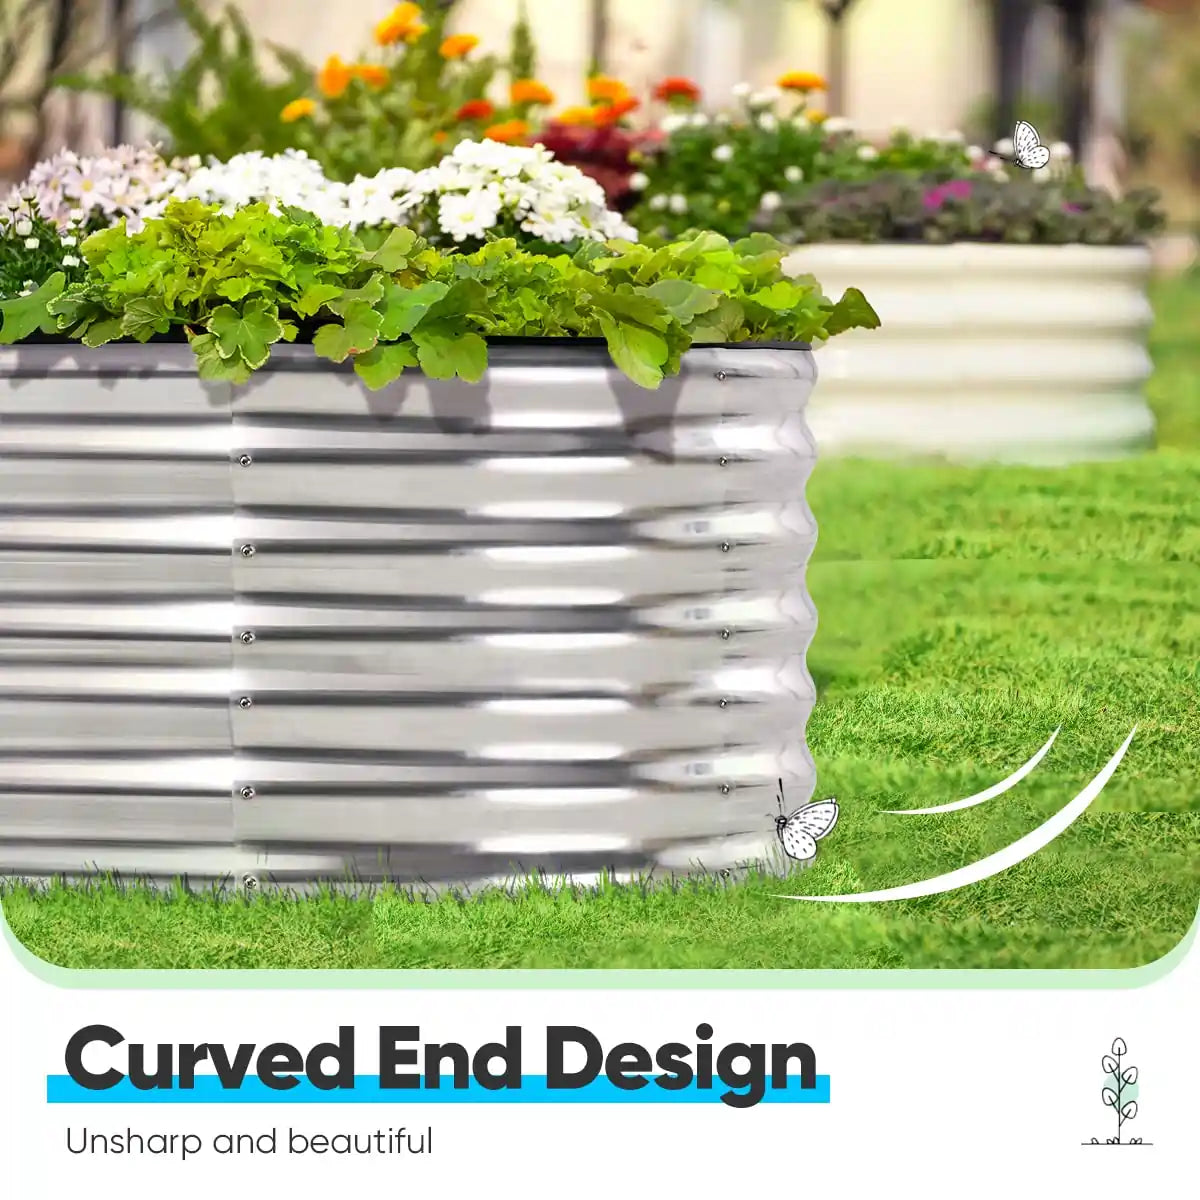 6' x 3' x 2' garden bed curved end design#color_silver